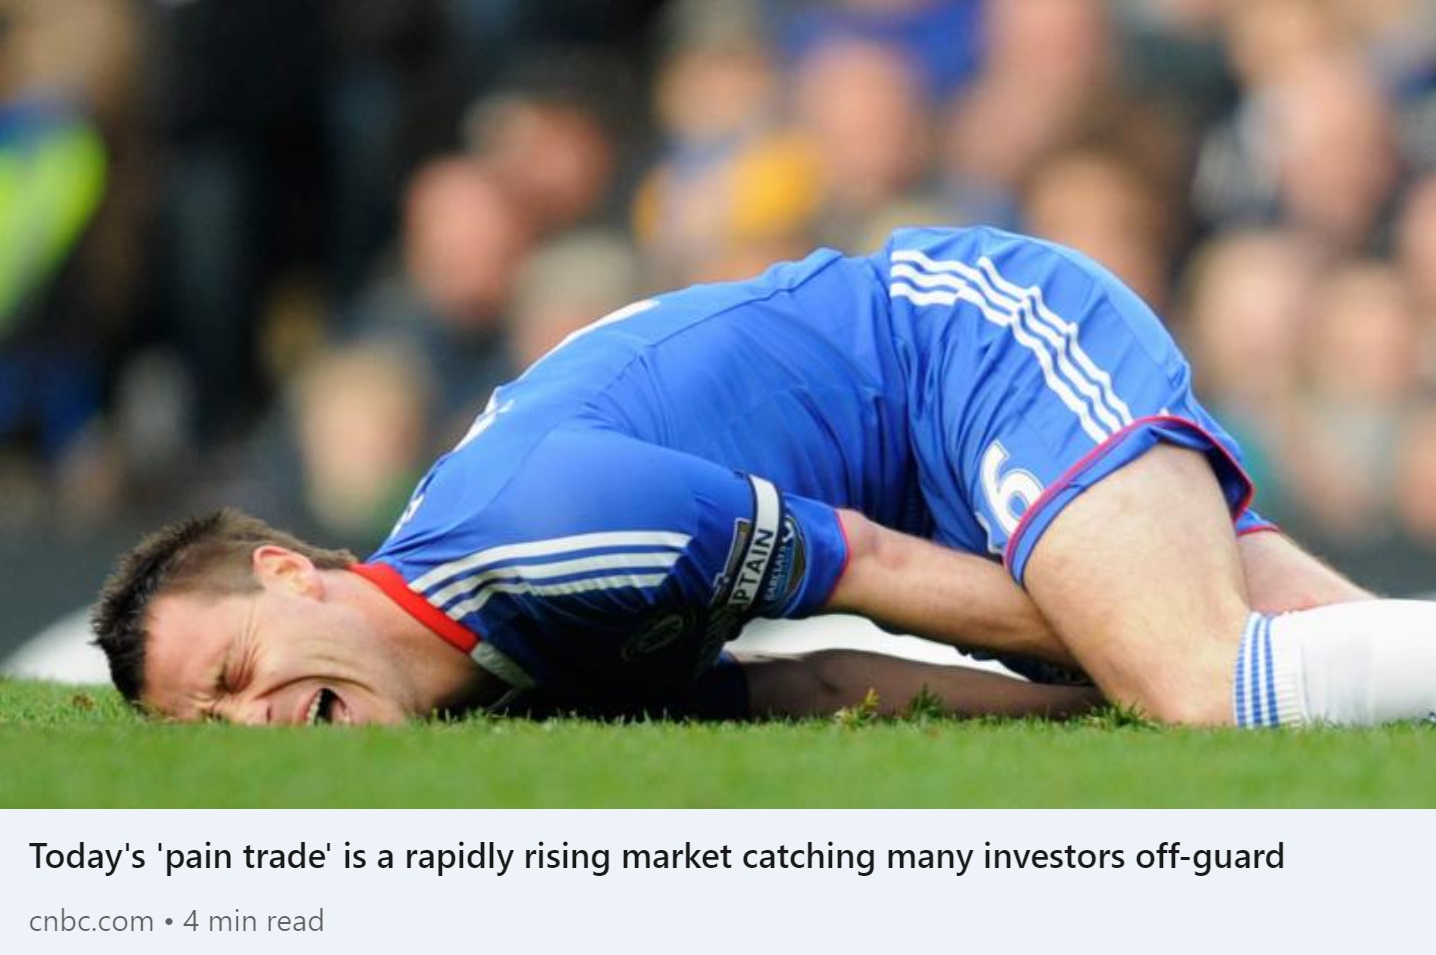 Today’s ‘Pain Trade’ is Catching Many Investors Off-Guard